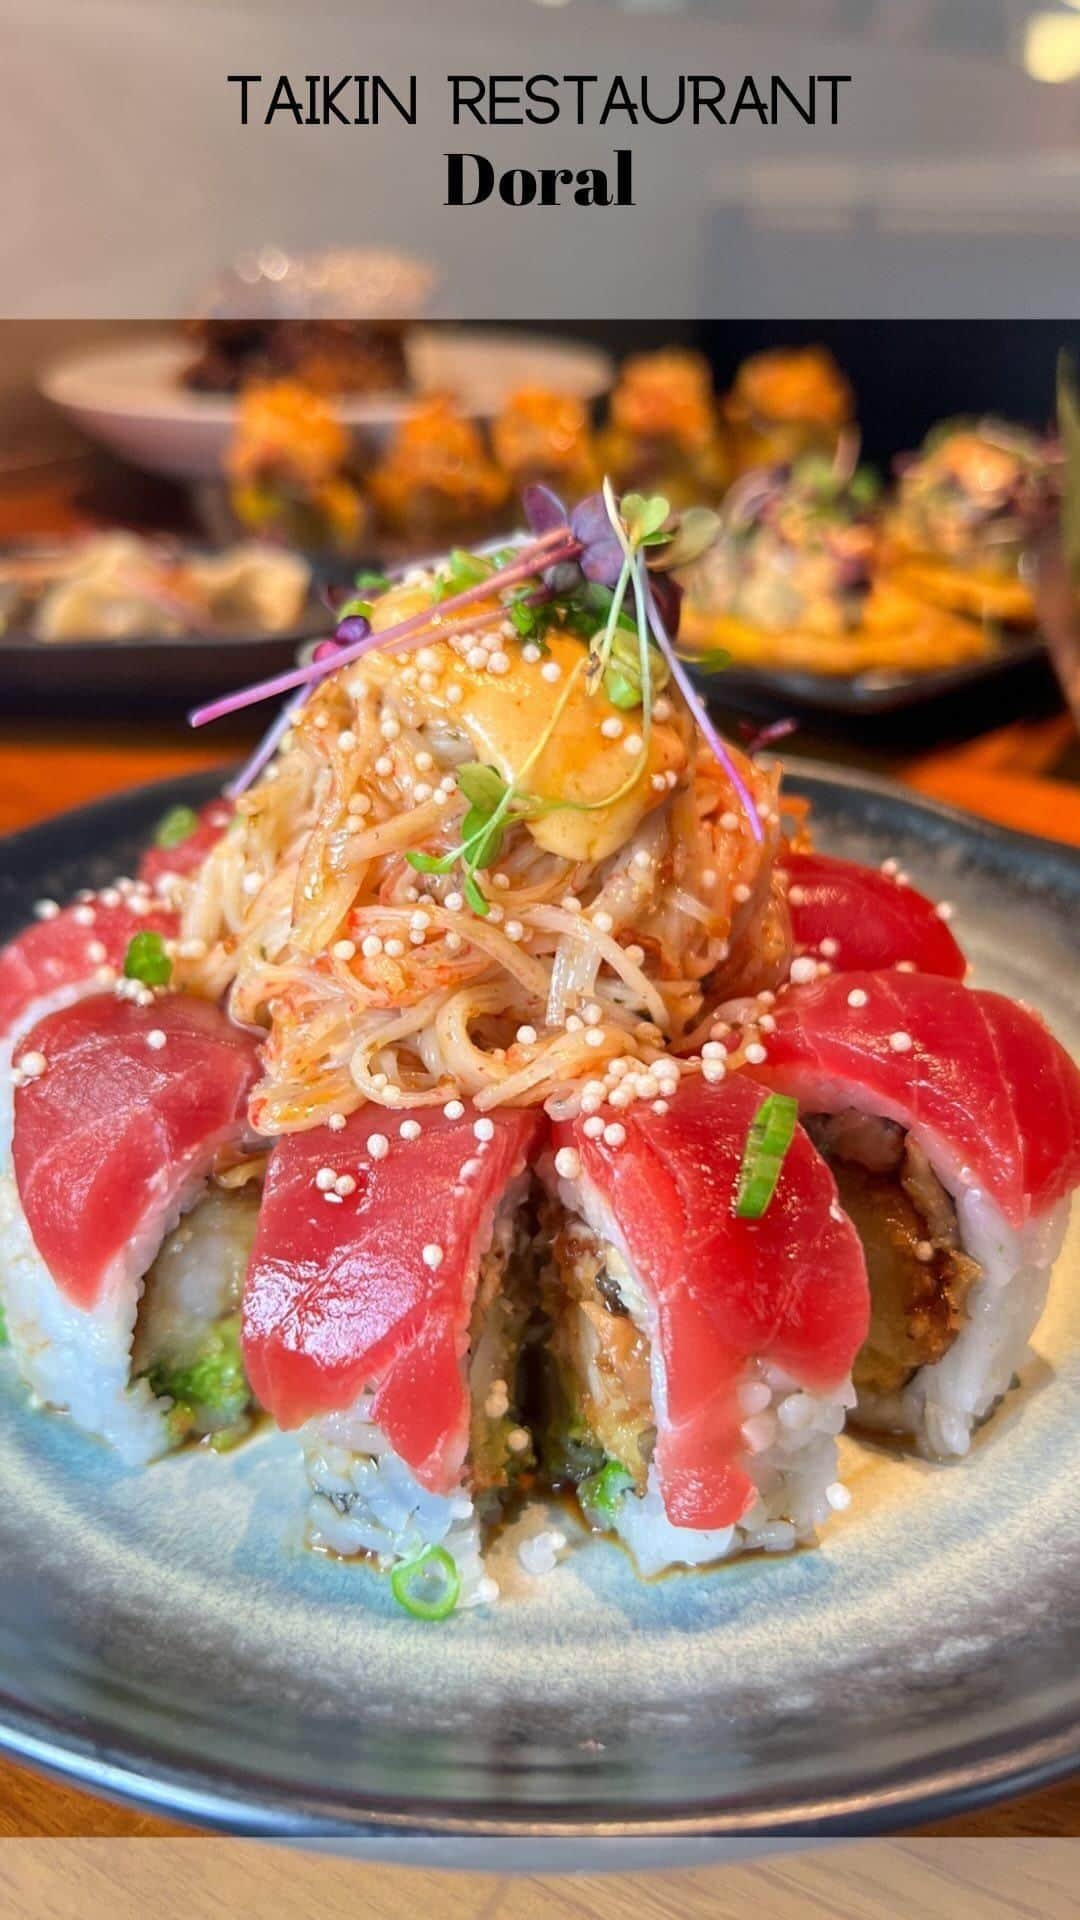 Cesar Gonzalez Cocineroのインスタグラム：「Must Try Sushi Spot in Doral. 🍣💕 @taikinrestaurant   Taikin Restaurant is a fusion of Japanese flavors with Latin twists. 🍱   You can Order Online at TaikinRestaurant.com  or by phone📱786.648.5366  Delivery Promos 🚗 🛍️   Online 2 x $32  You can choose 2 sushi rolls + 1 appetizer or Orange BBQ Ribs, Chaufa Fried Rice or Noodles + appetizer.  You can combined them!  📍7450 NW 104th Ave C-101, Doral, FL 33178  #fashioneattreavel #taikin #taikinrestaurant #taikindoral #doral #doralrestaurants #sushi #sushirestaurants #sushimiami #asianrestaurants #miami #miamirestaurants #miamifoodie」